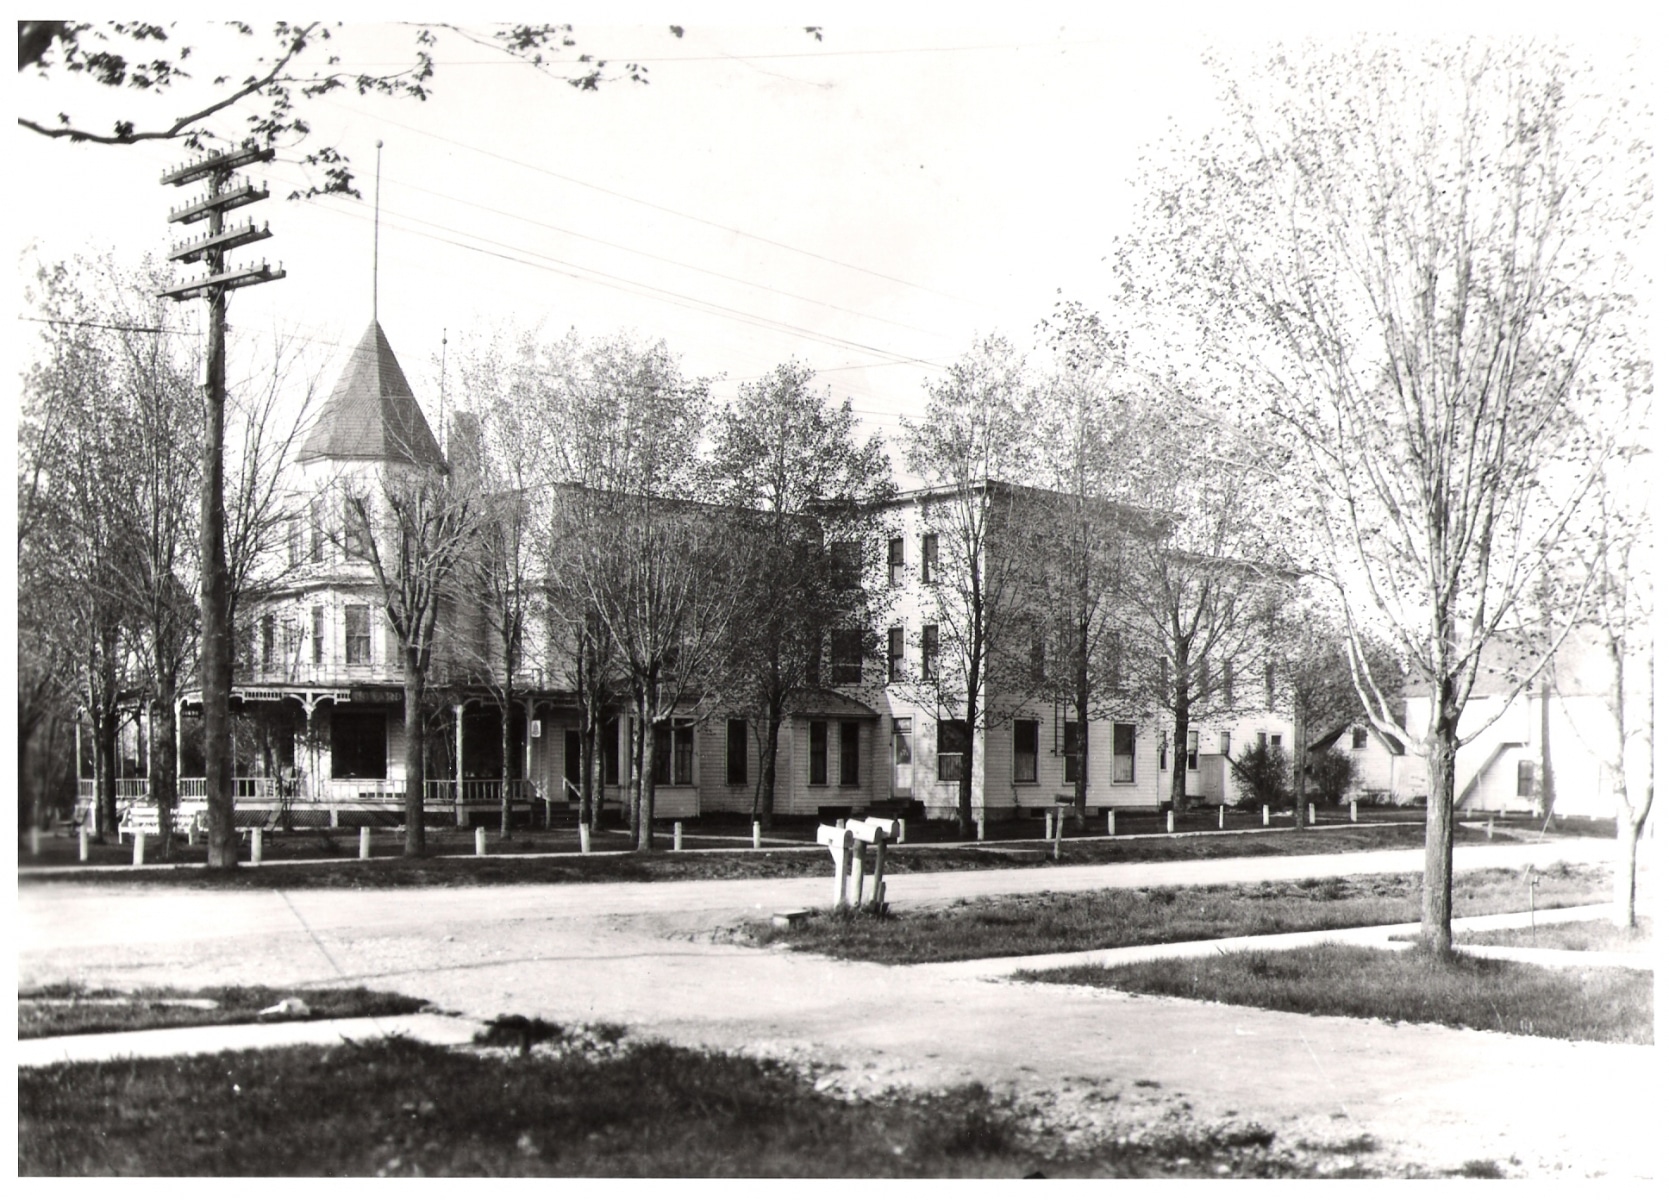 historic image of Stafford's Bayview Inn